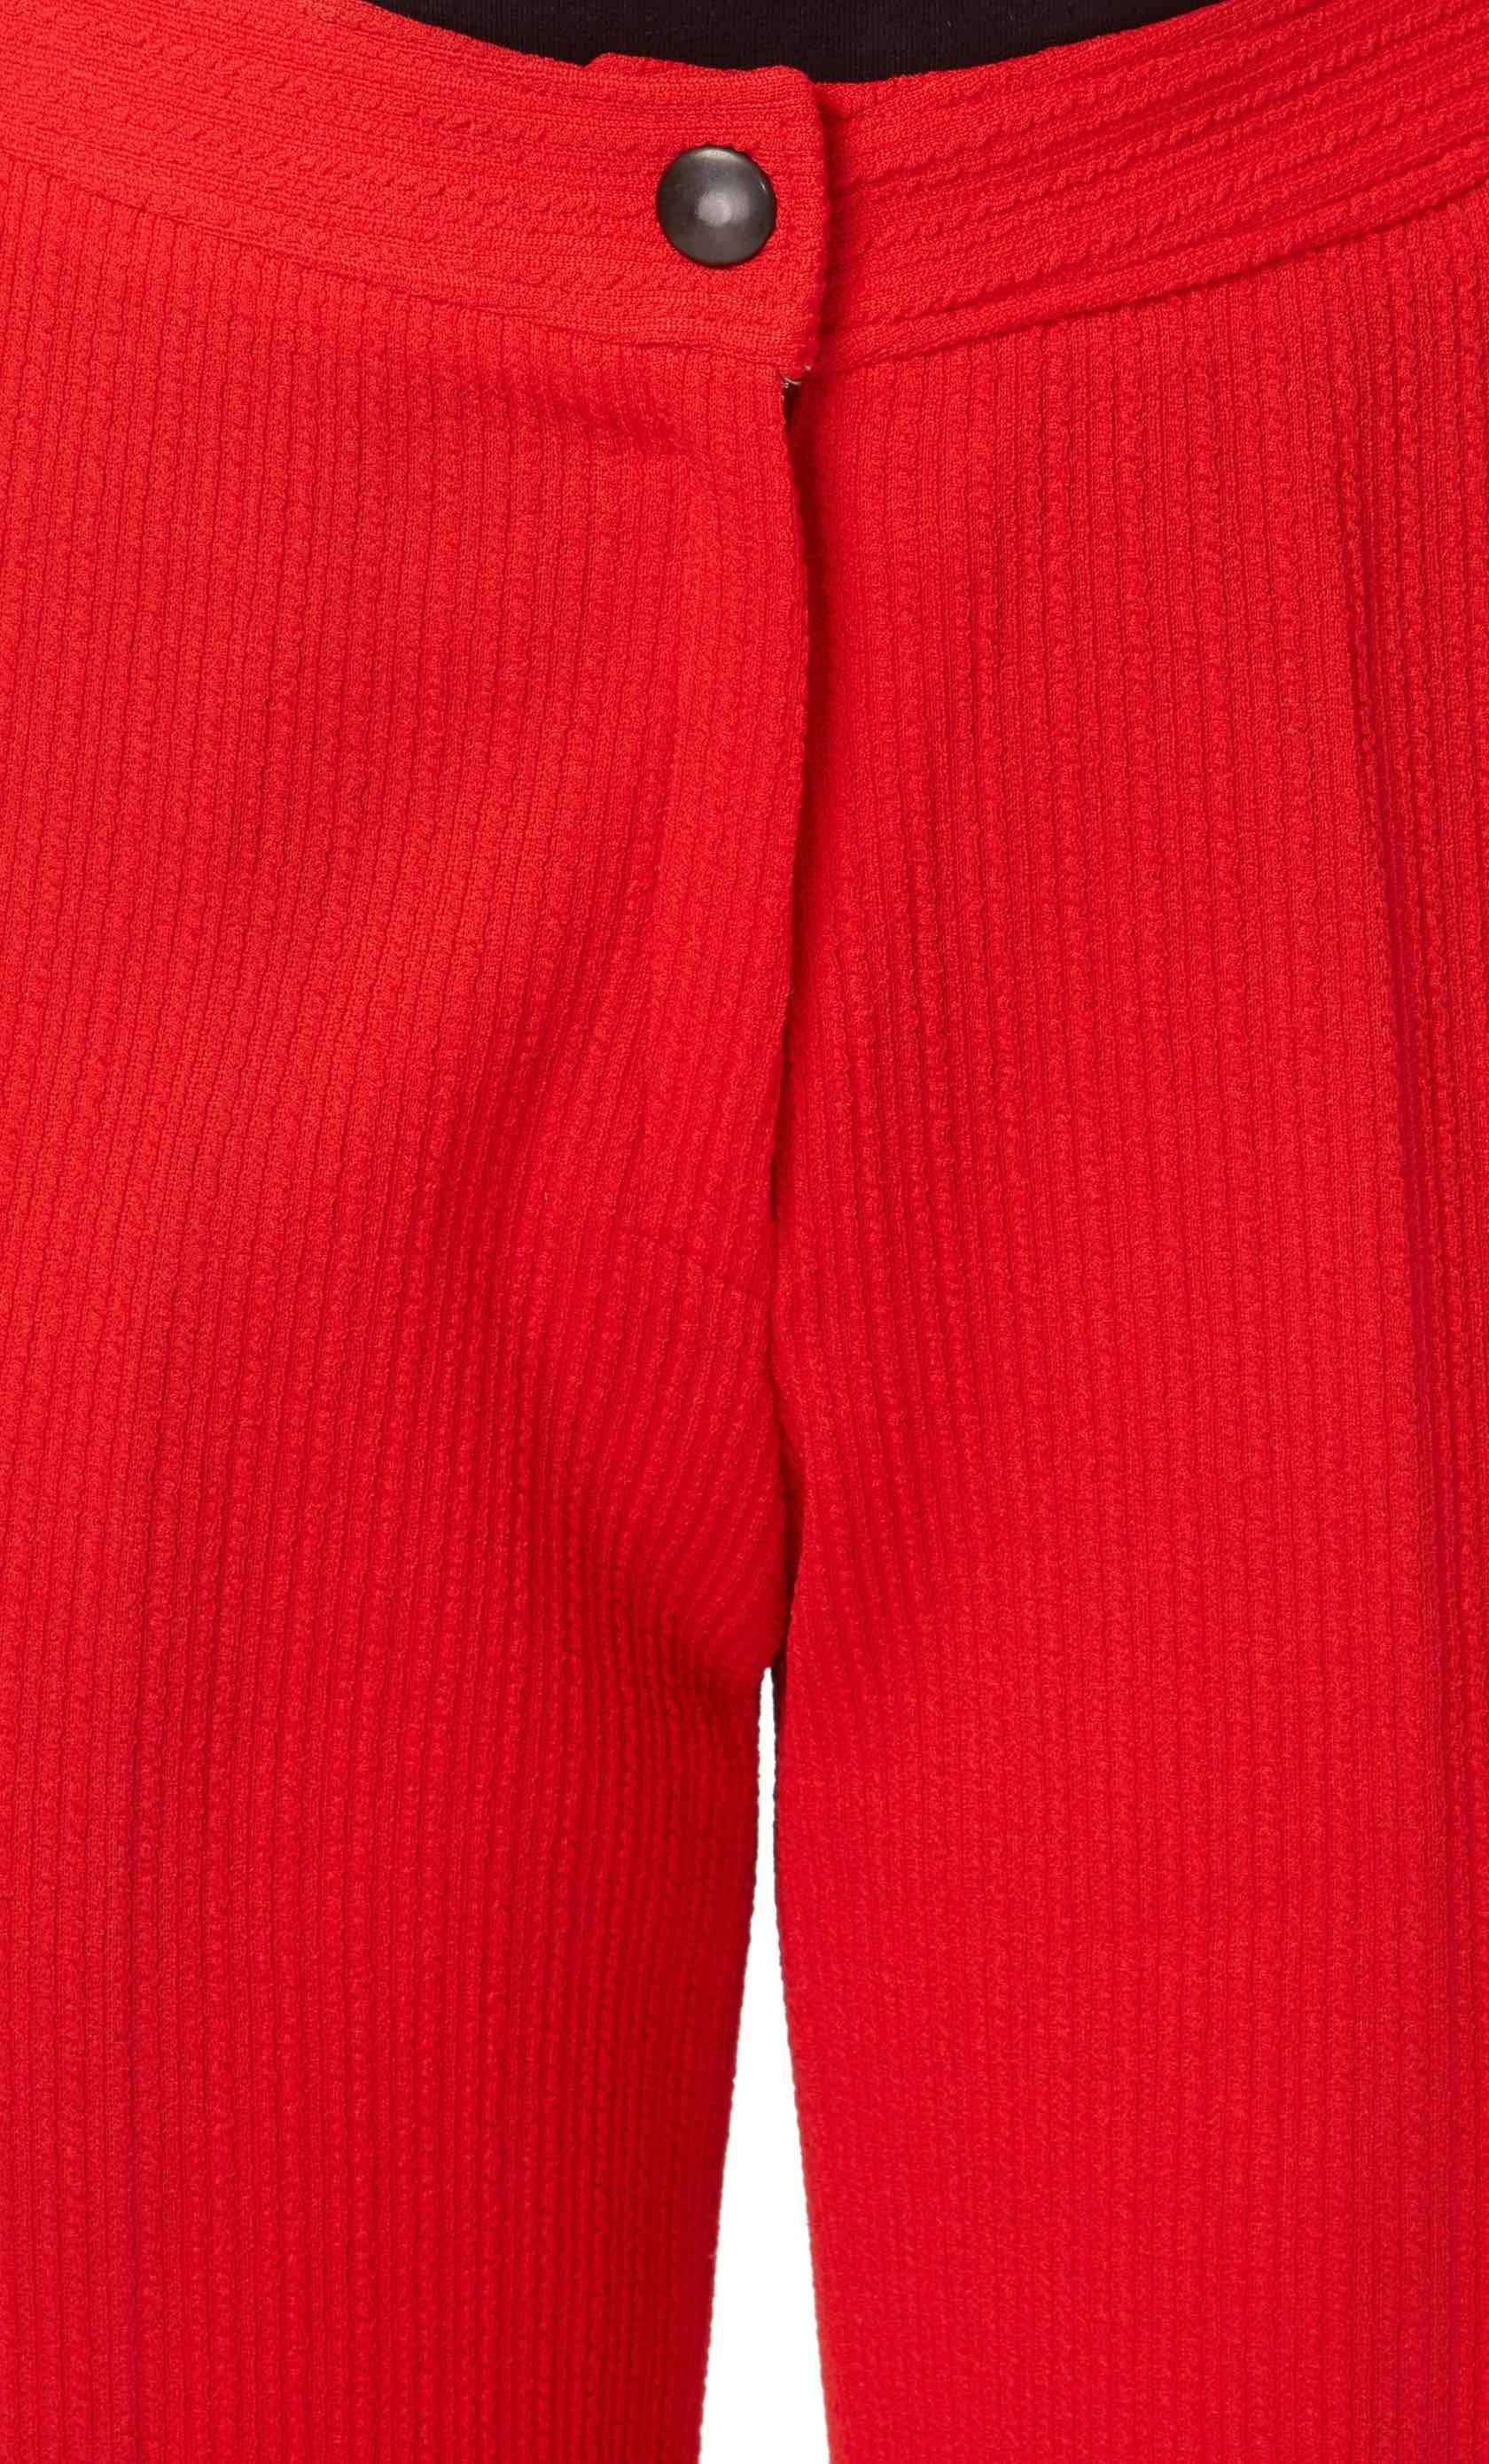 Women's Red trousers, circa 1972